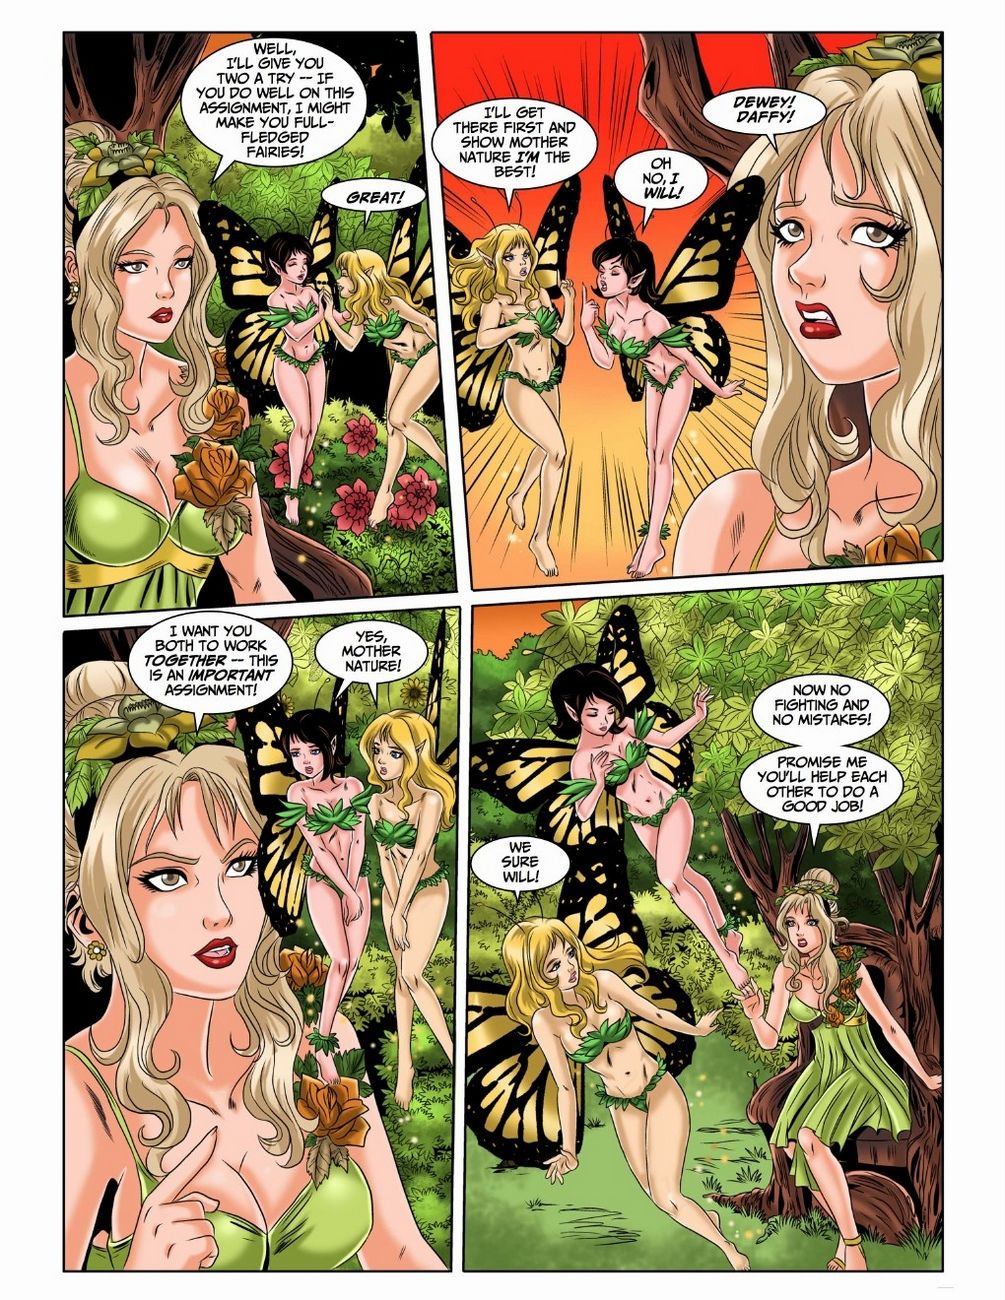 The Puberty Fairies 1 page 8